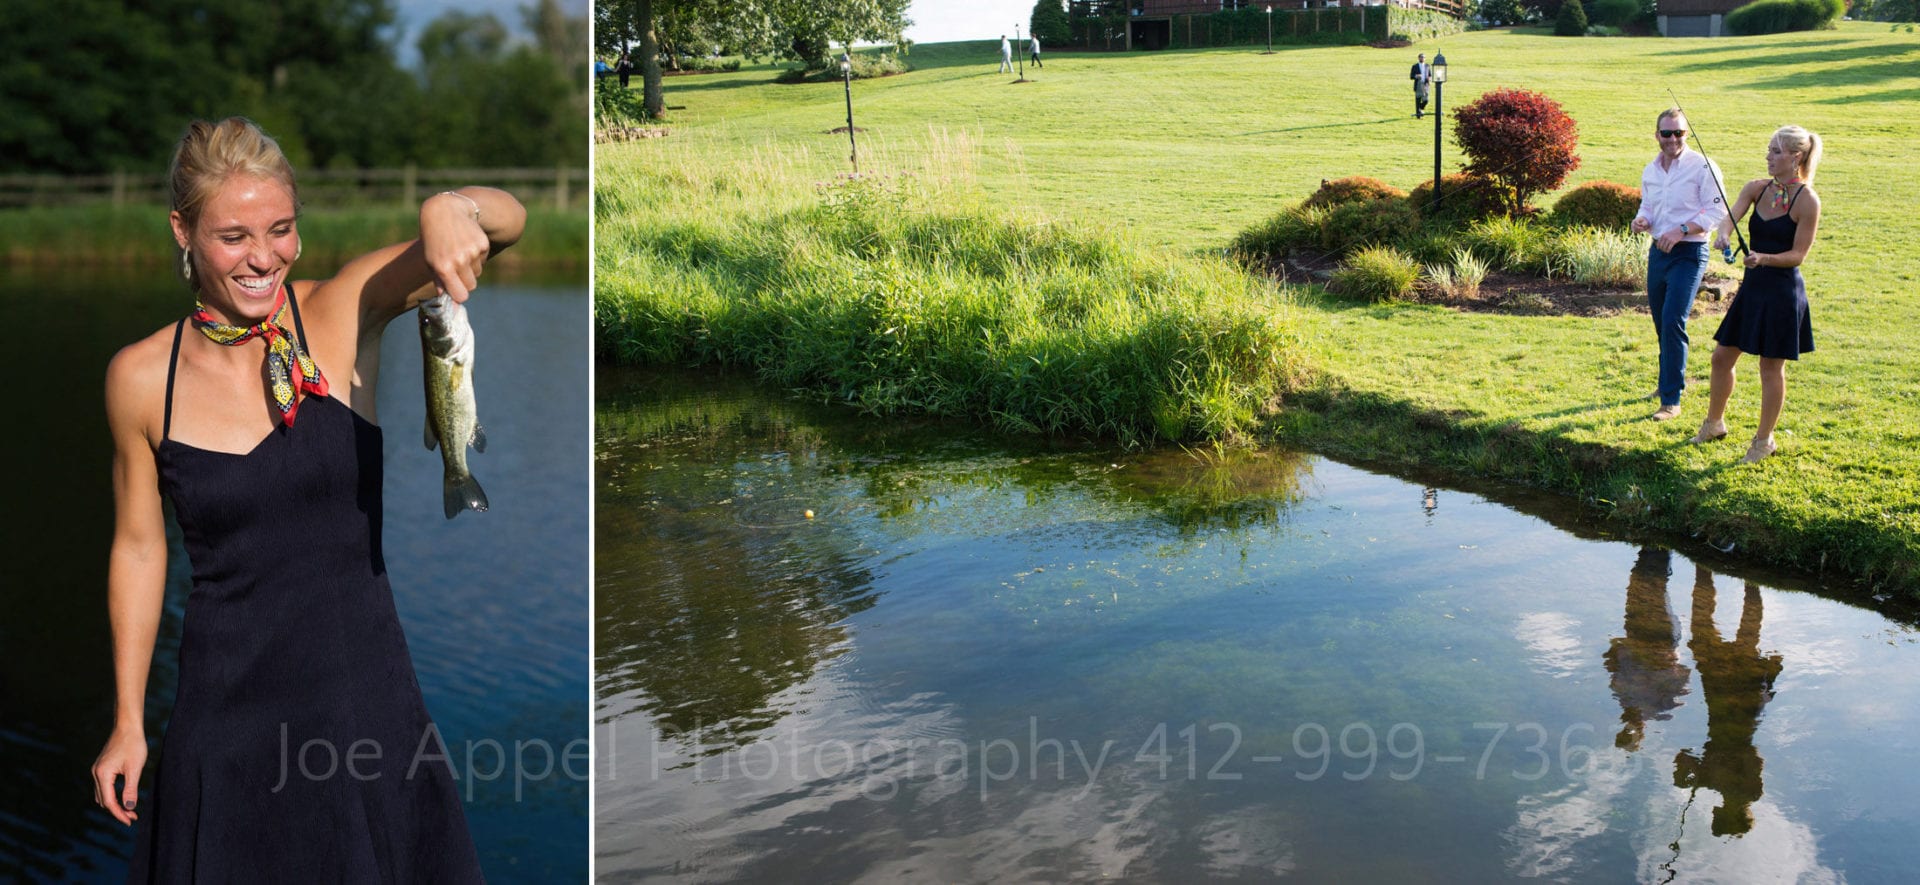 two photos: an attractive blond woman wearing a blue dress holds a fish that she just caught. The other photo shows her fishing with her boyfriend as they are reflected in a pond.